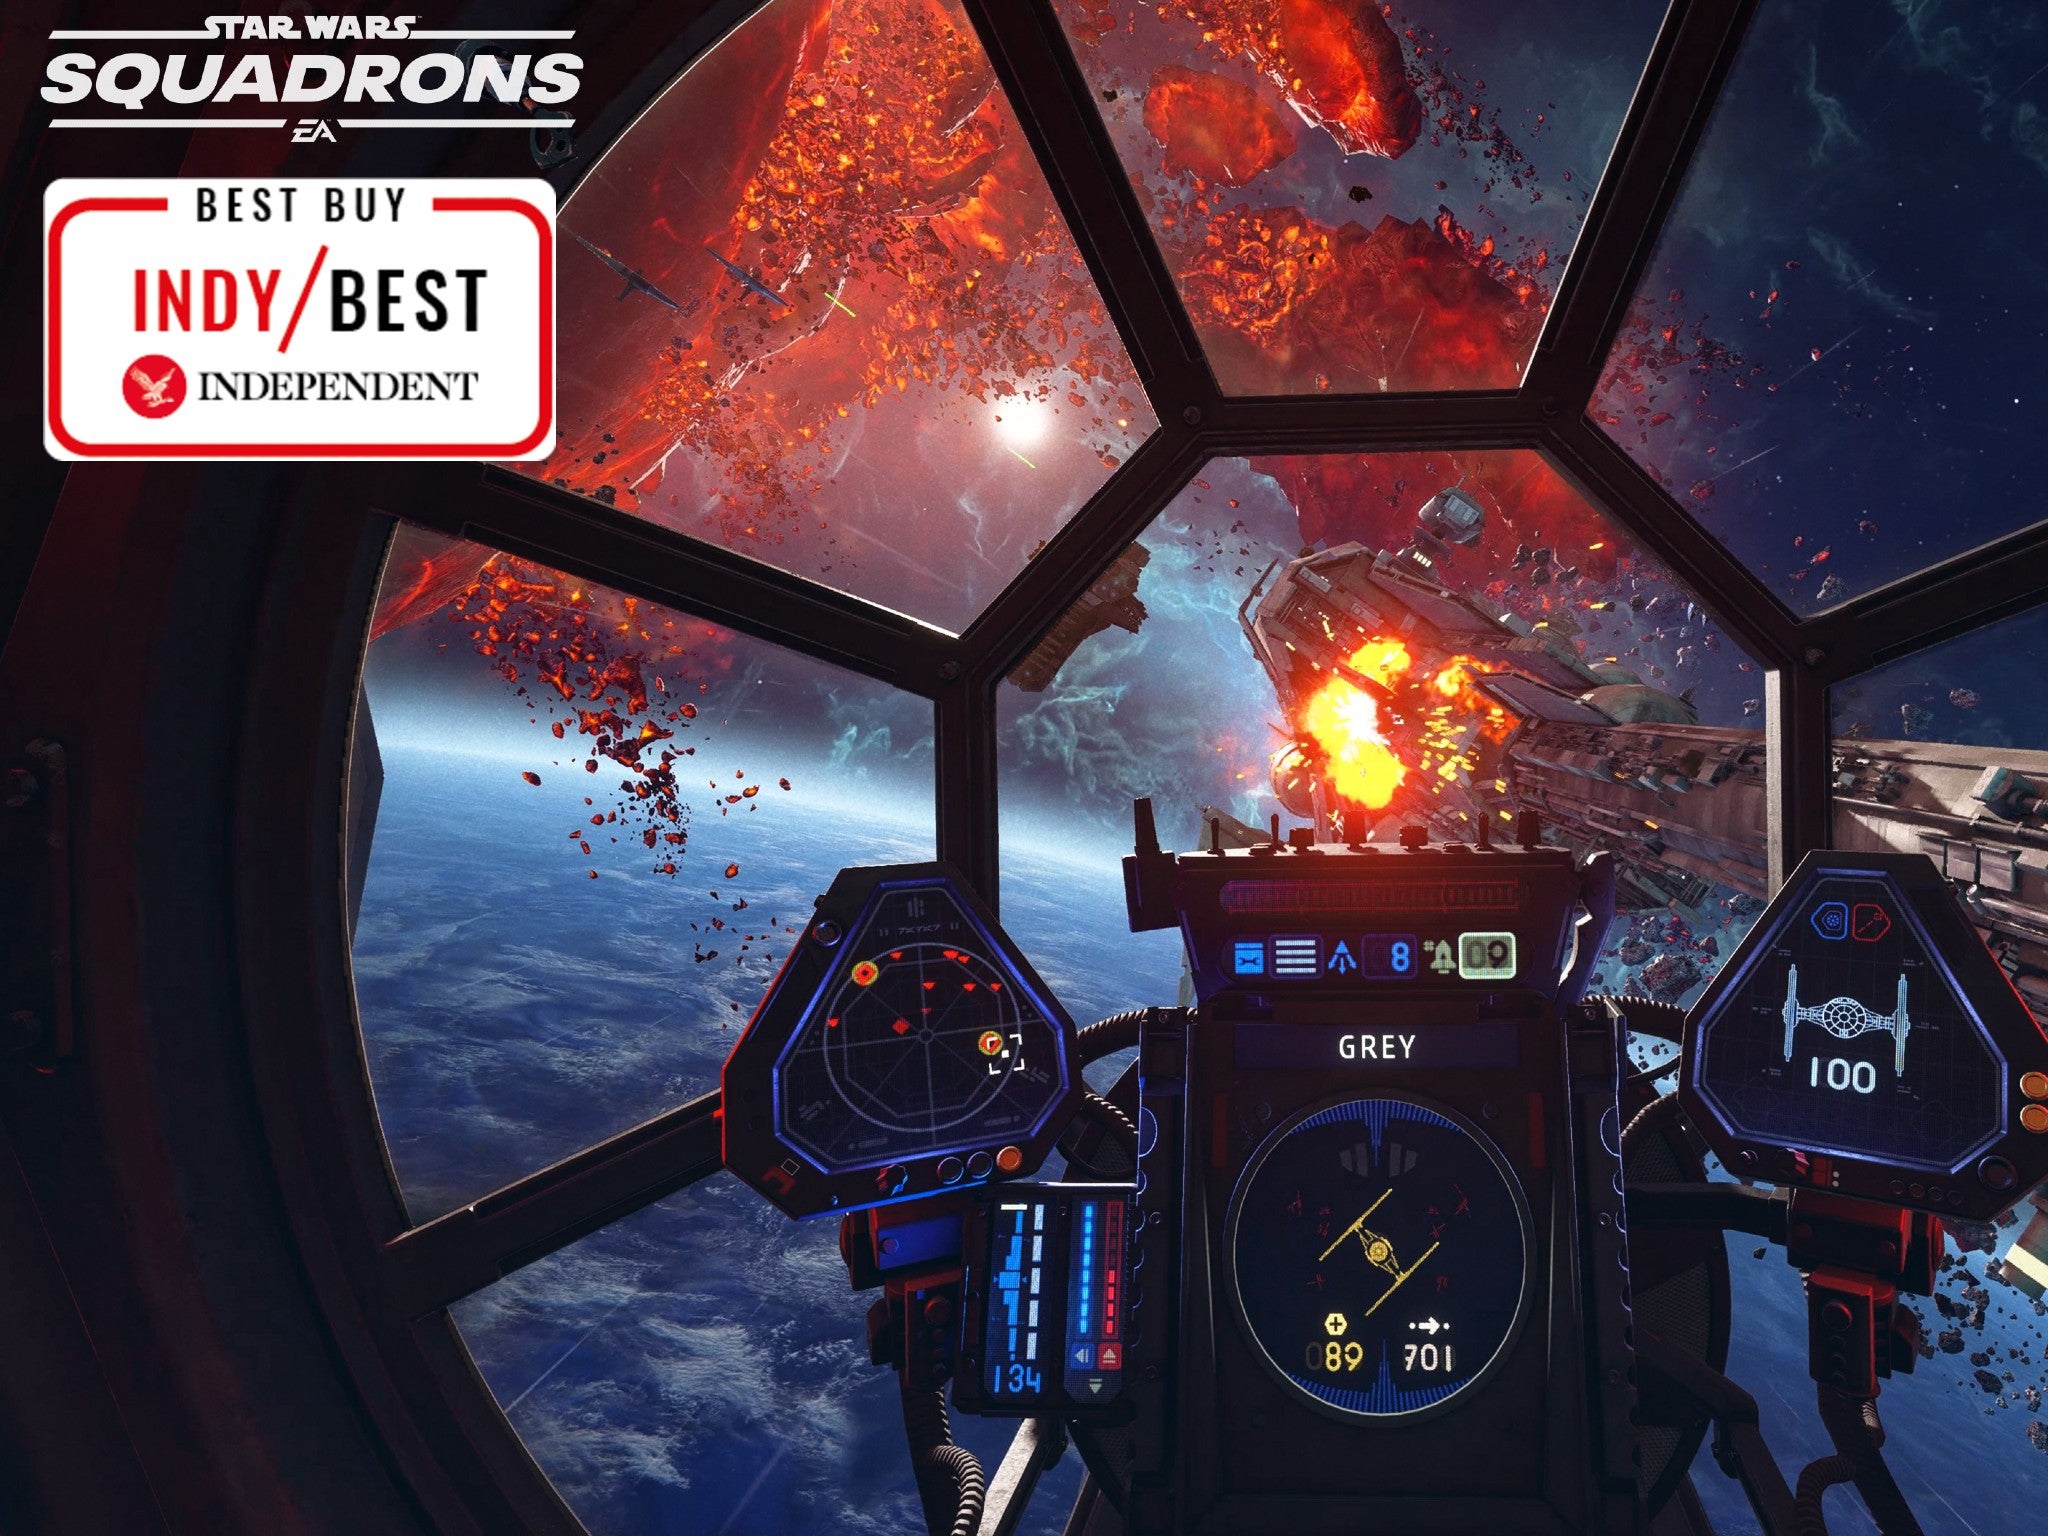 “Star Wars_ Squadrons_ (PS4) indybest.jpg